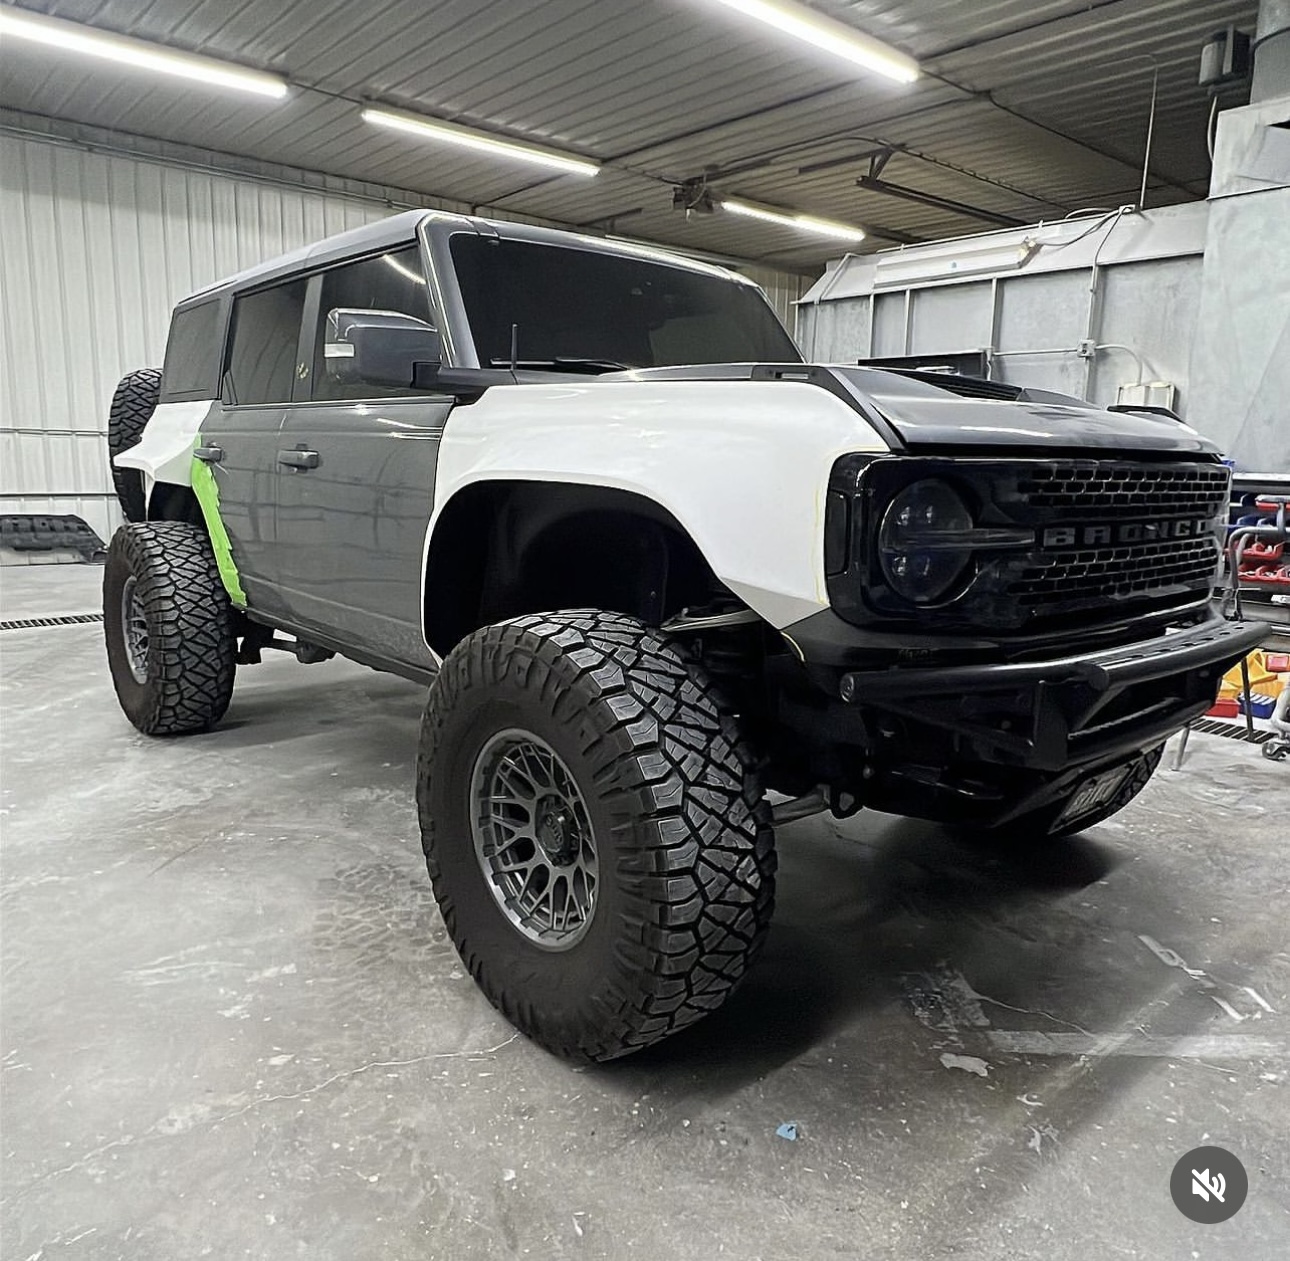 Ford Bronco Outerbrxnco mid travel Fun-Haver widebody build progress 1702658899021